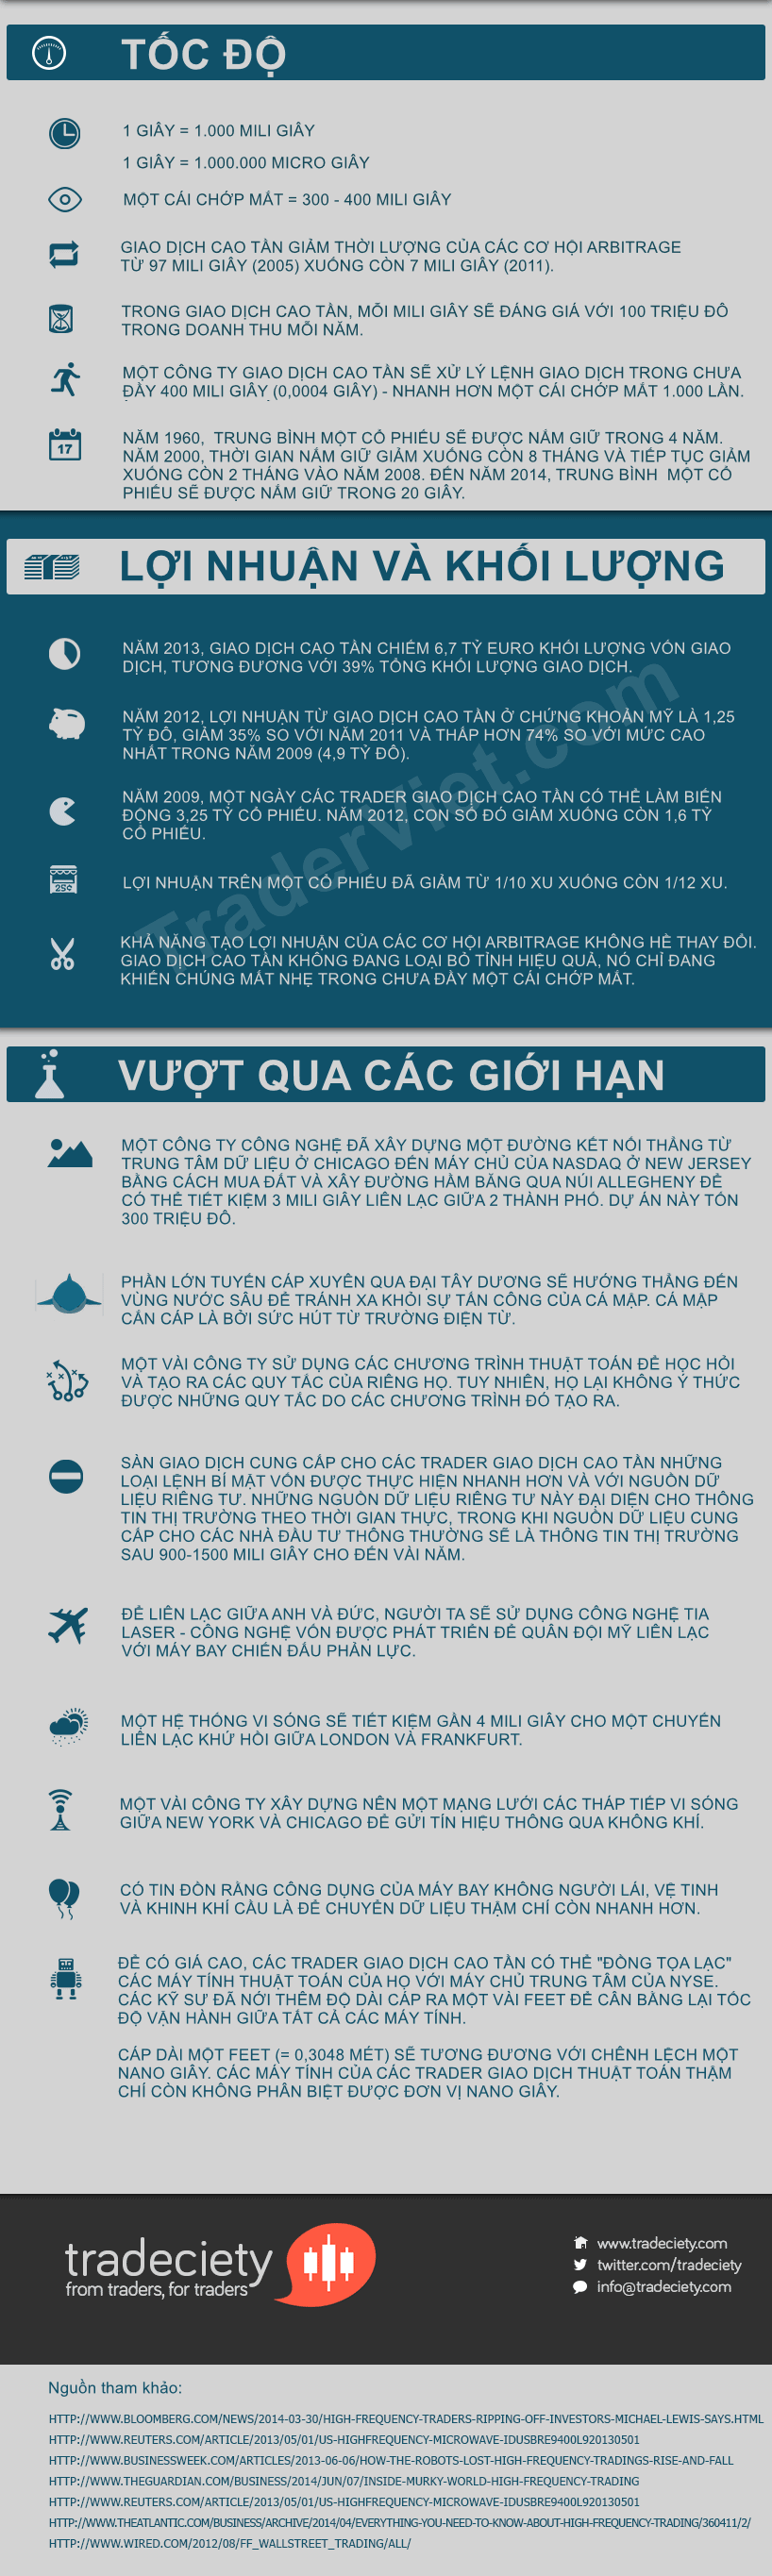 Mo-loi-tu-duy-voi-20-su-that-bat-ngo-ve-giao-dich-cao-tan-High-frequency-trading-TraderViet1.png